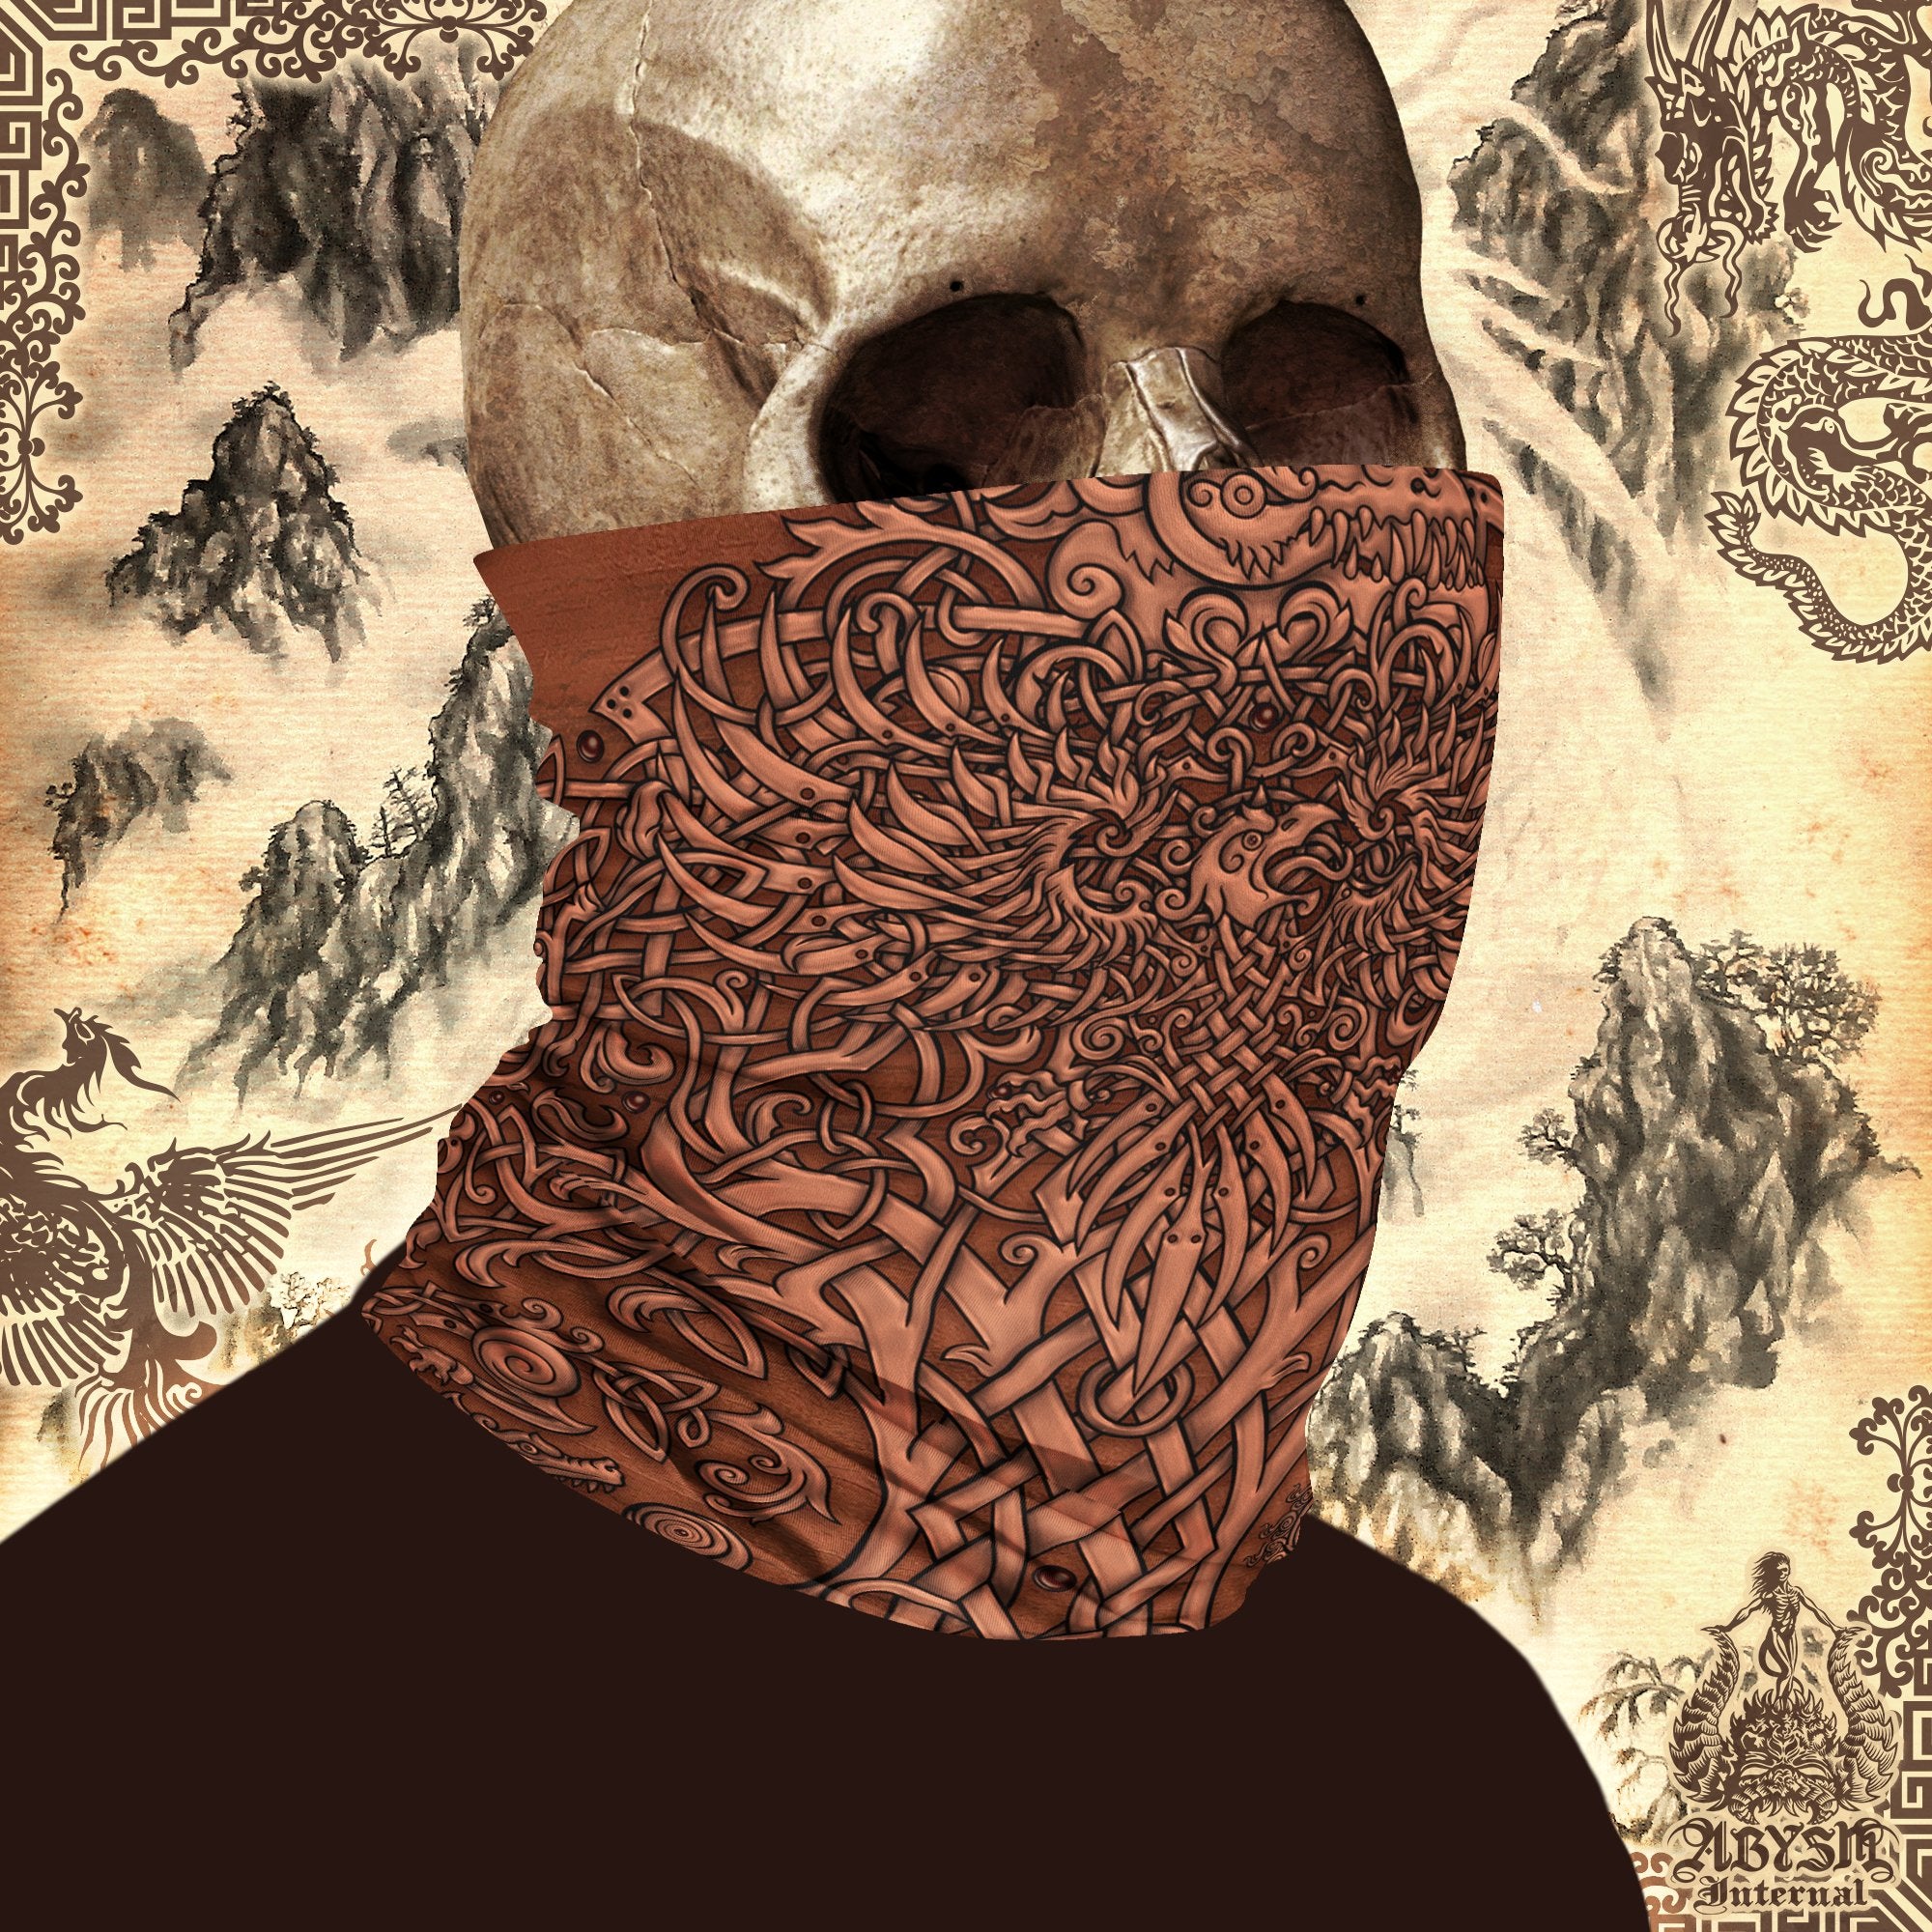 Yggdrasil Neck Gaiter, Face Mask, Printed Head Covering, Viking Tree of Life, Nordic Art - 6 Colors - Abysm Internal